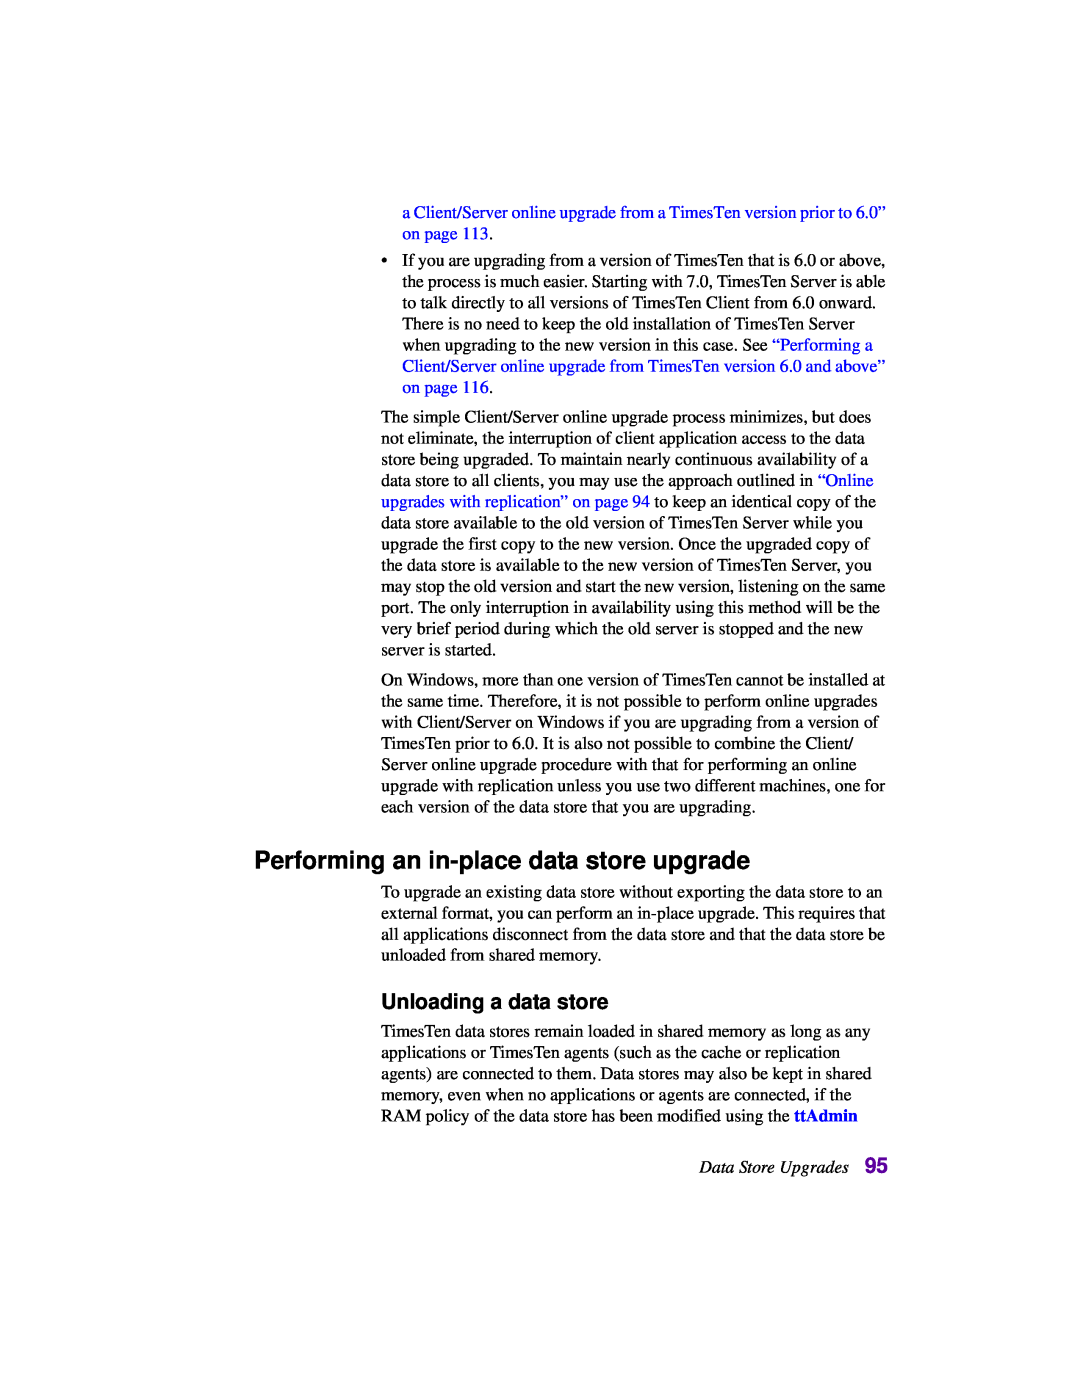 Oracle Audio Technologies B31679-01 manual Performing an in-place data store upgrade, Unloading a data store 